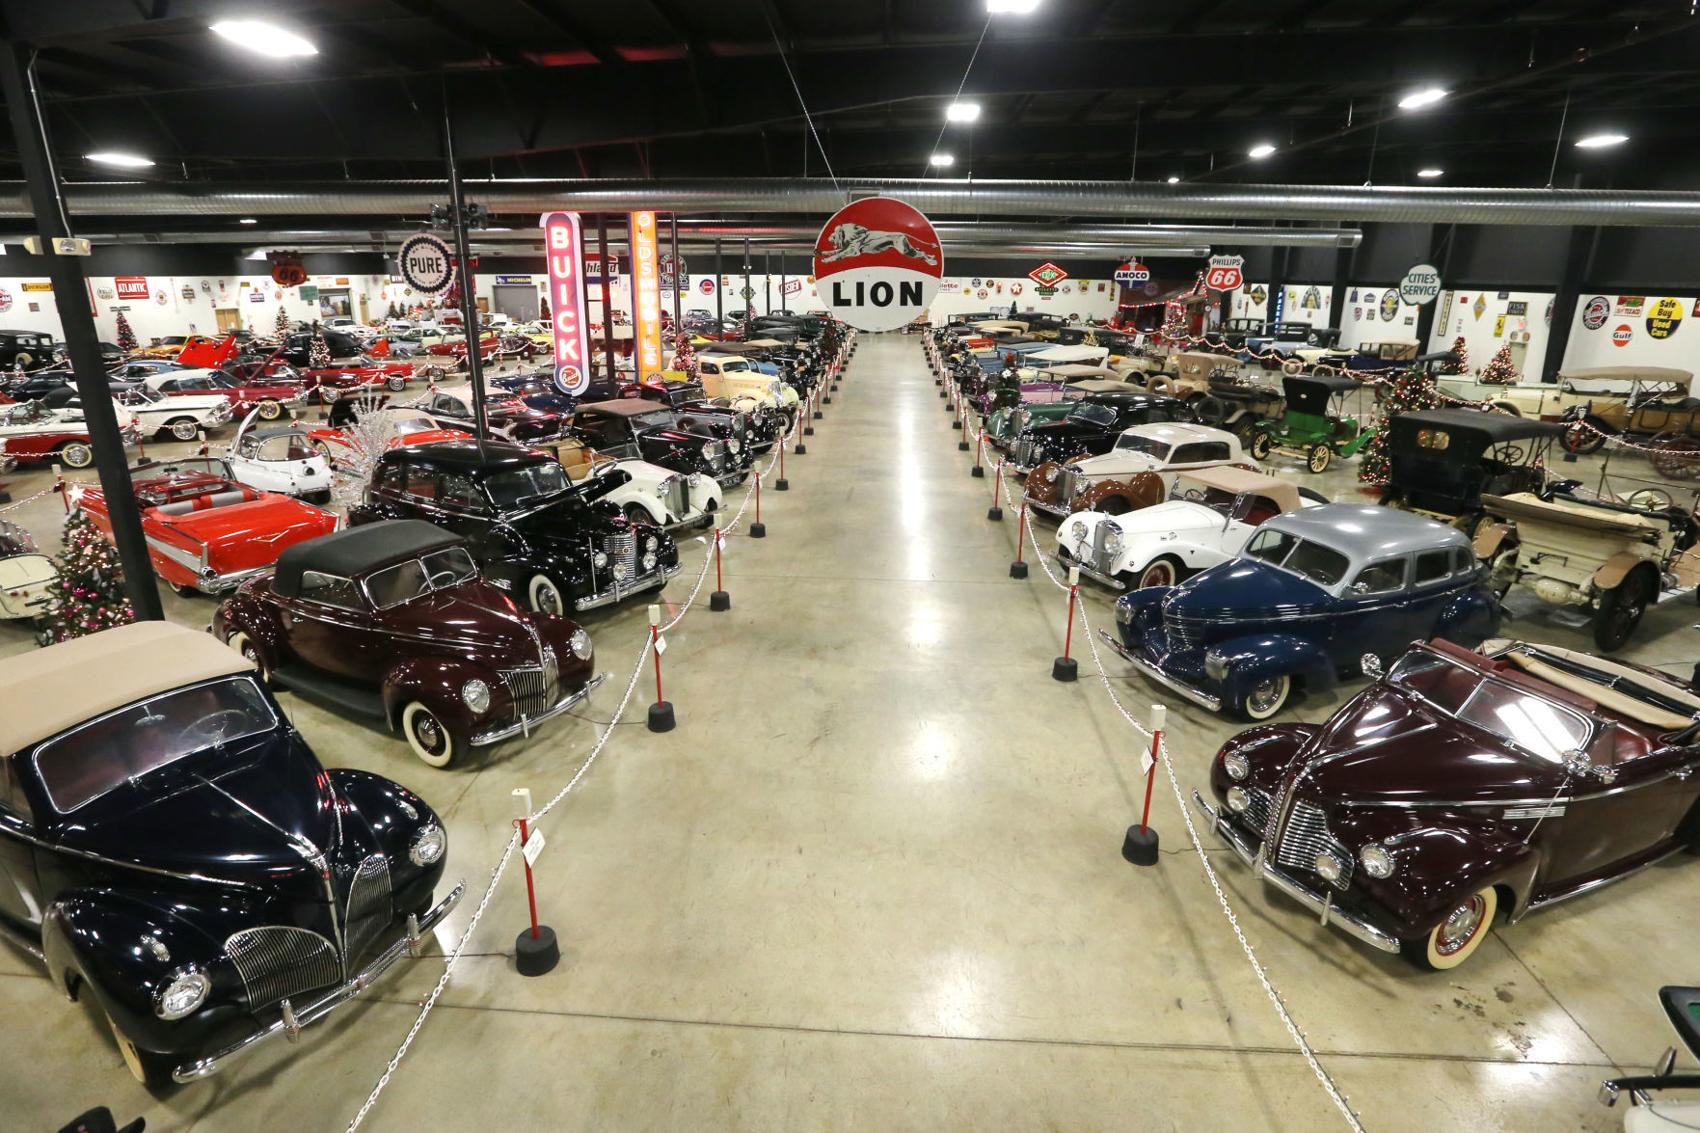 Tupelo museum, Tupelo museum sets auction to sell its collection, ClassicCars.com Journal